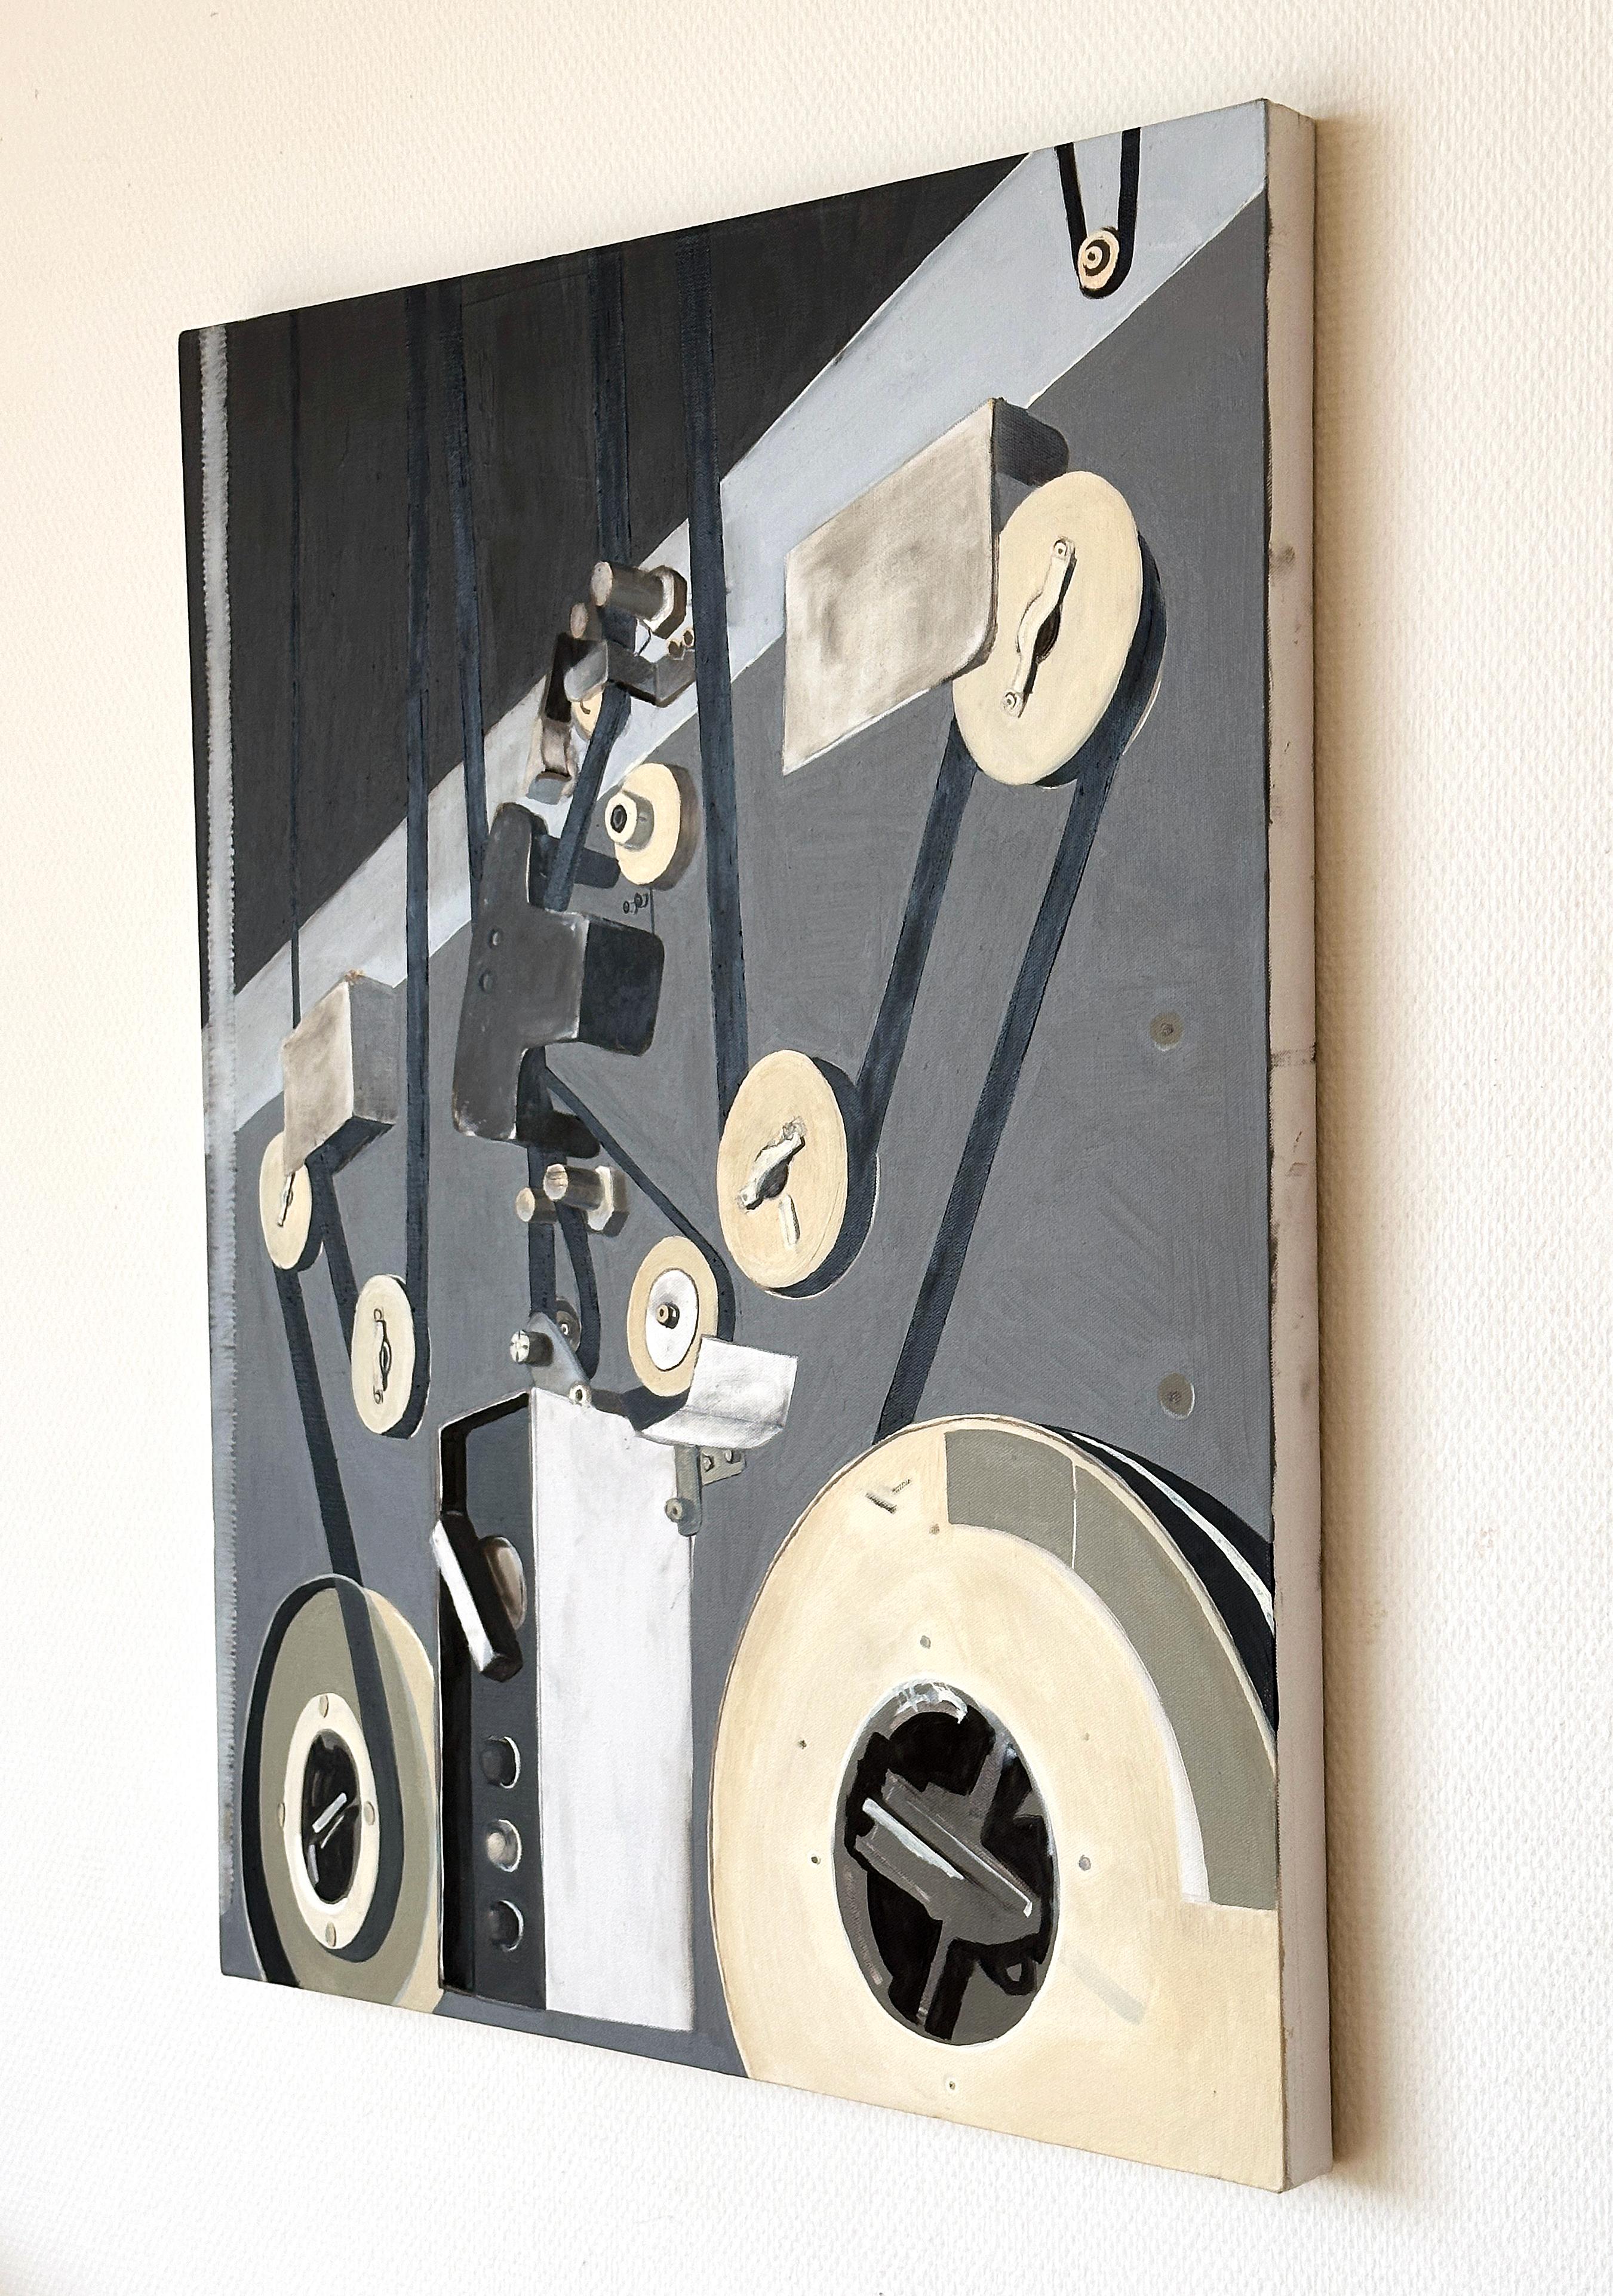 A painting by Amanda Andersen from a larger body of work created in the early 2010s which explored vintage technologies and materials including VHS cassette tape, reel-to-reel tape machines and other retro devices. 
This painting titled “Reels” was